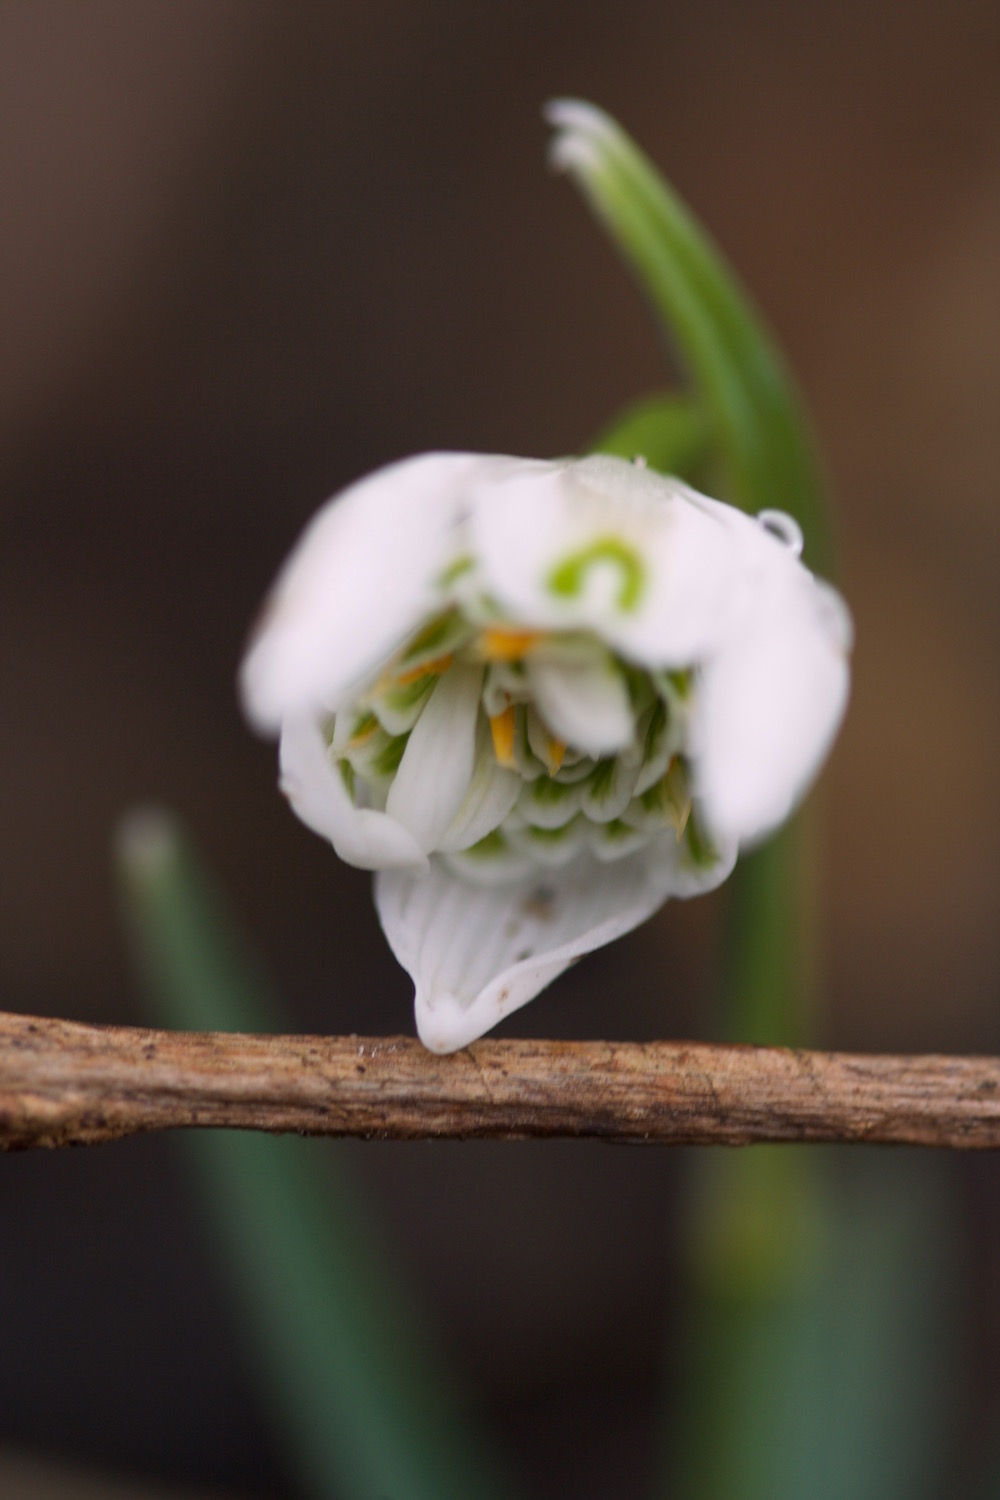 Noted: Snowdrops